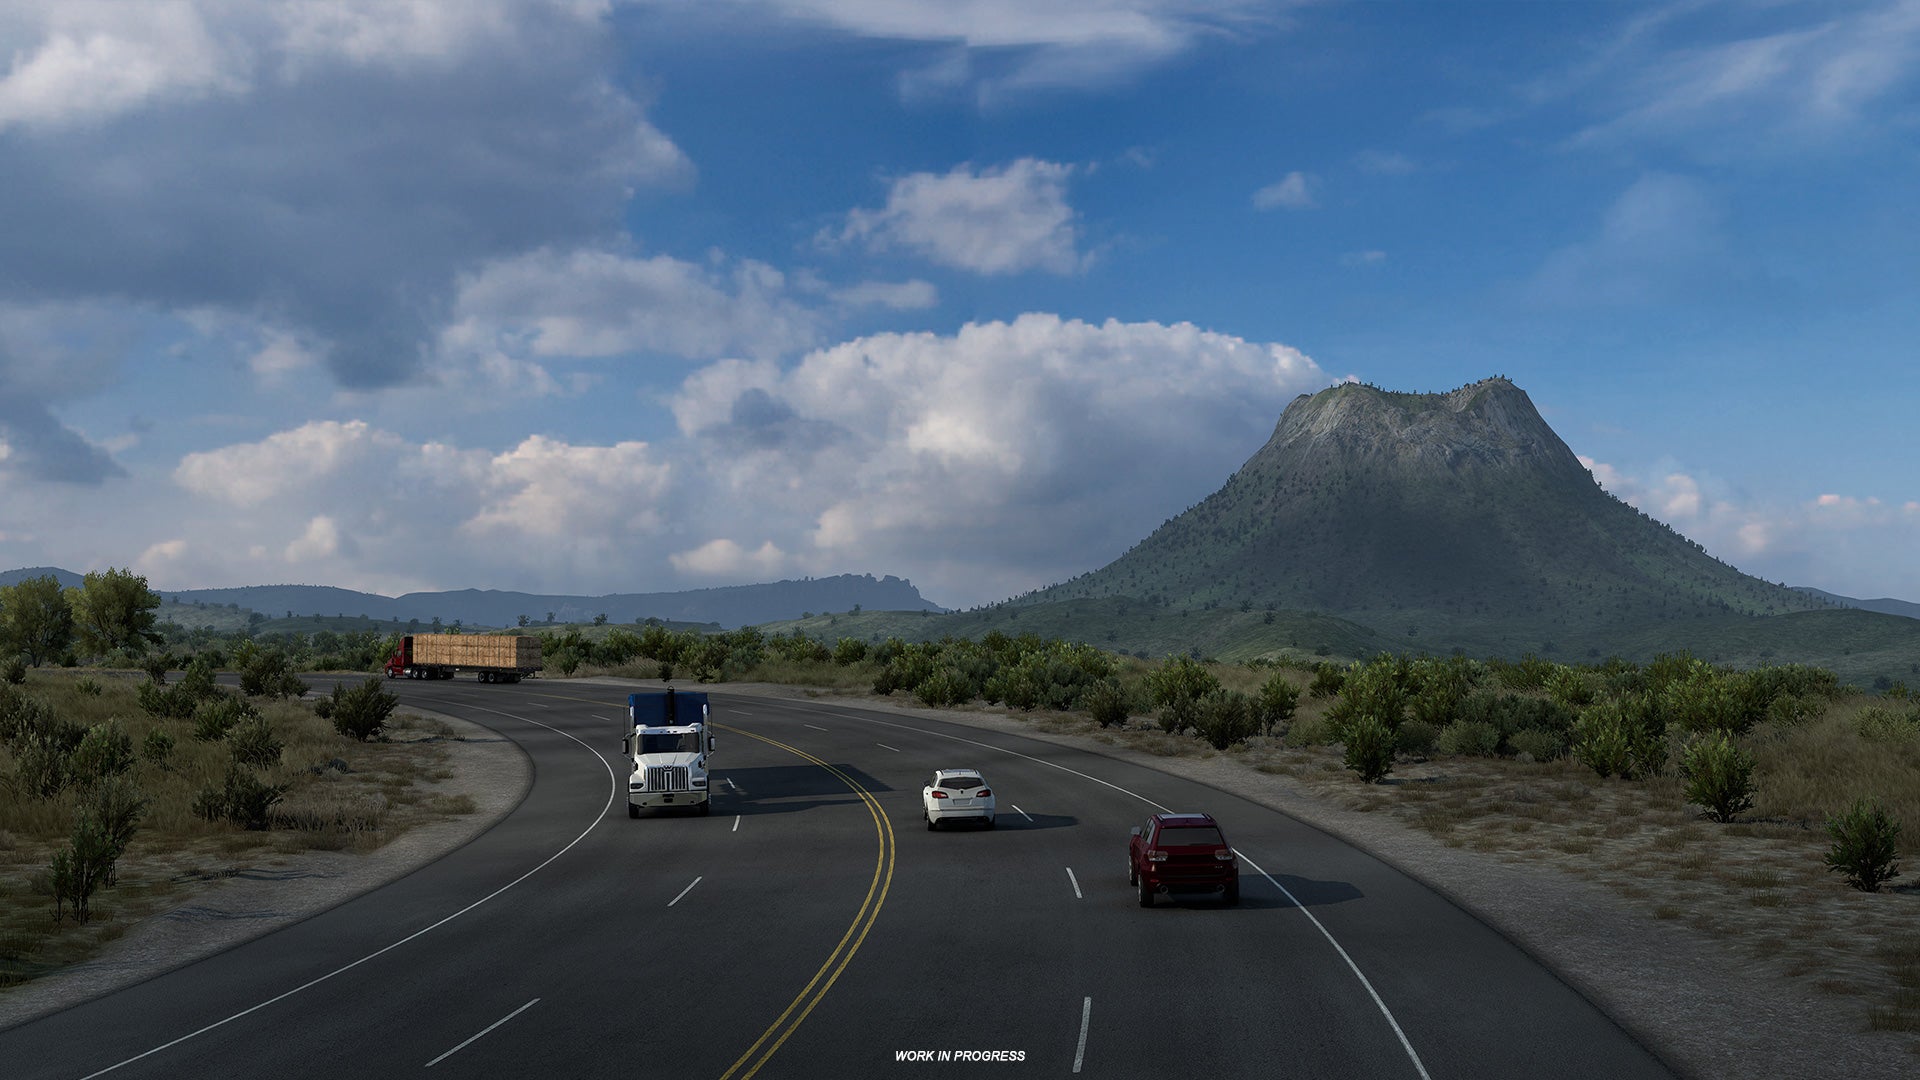 American Truck Simulator Texas - A four lane highway with cars and trucks passes through the plains with a large hill in the background.